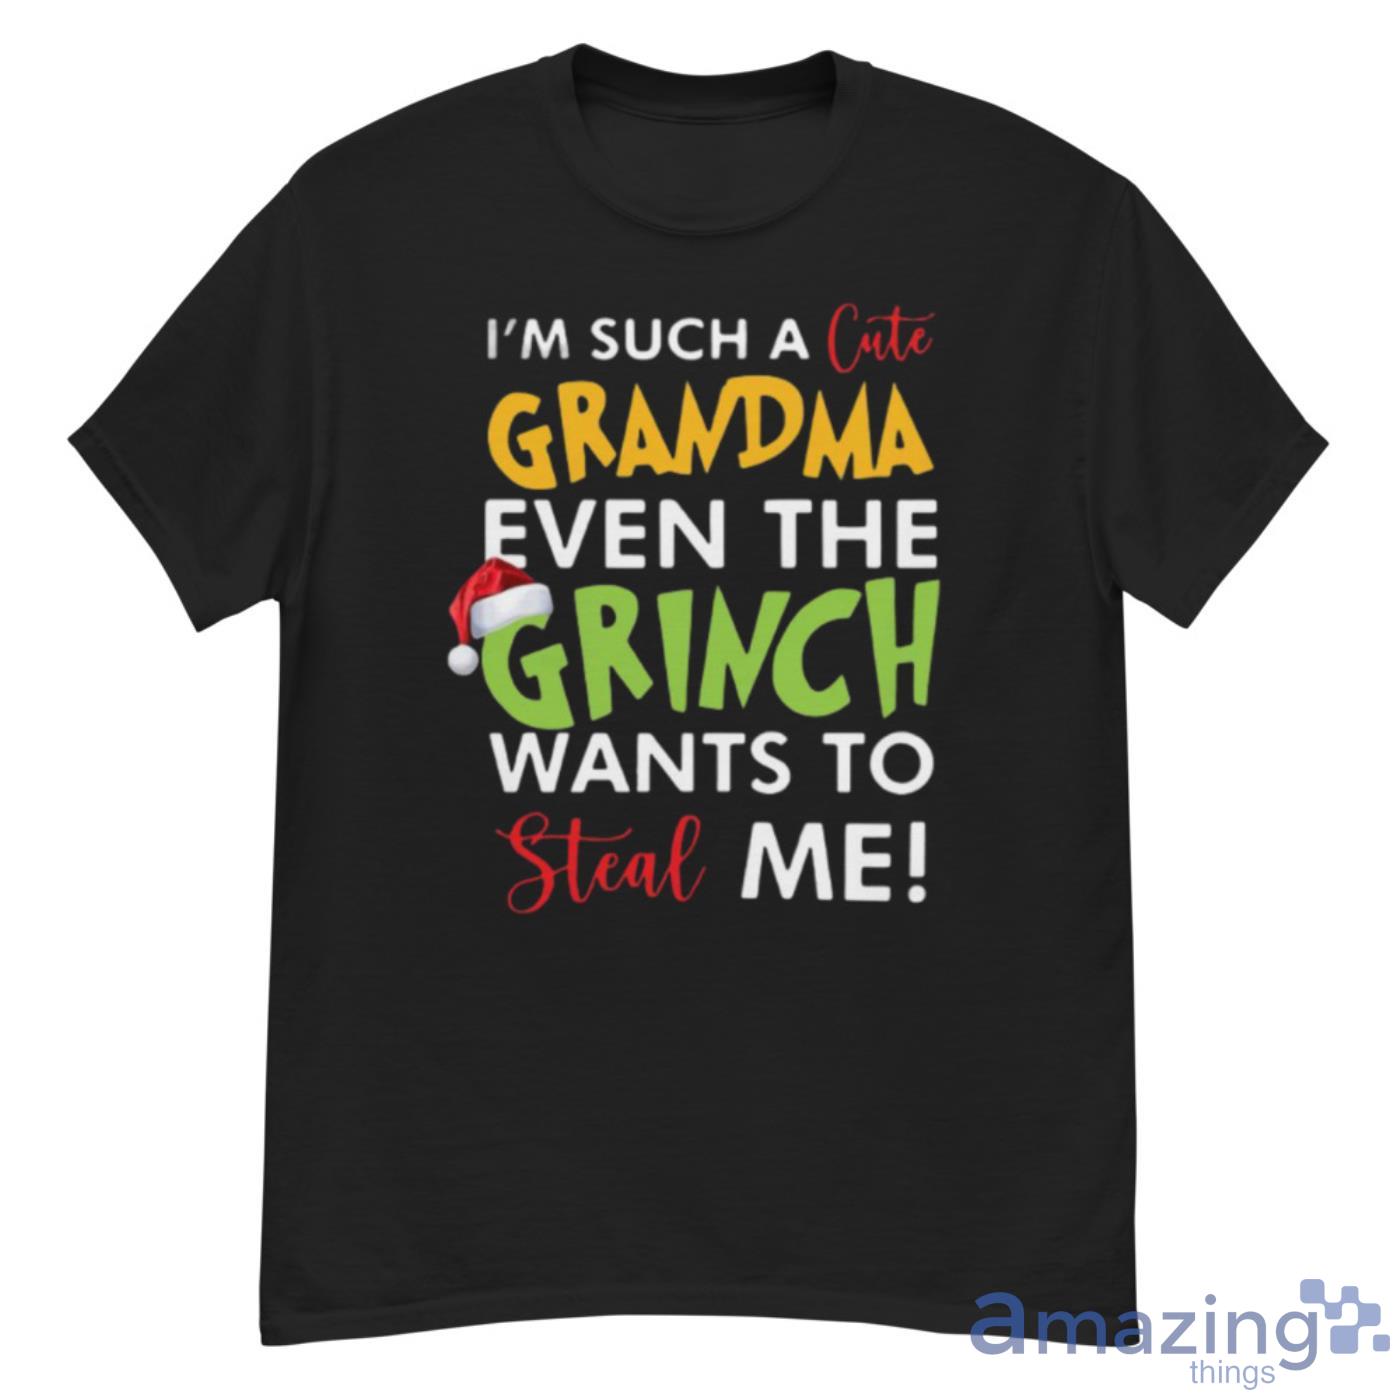 I’m Such A Cute Grandma Even The Grinch Wants To Steal Me Christmas Shirt - G500 Men’s Classic T-Shirt